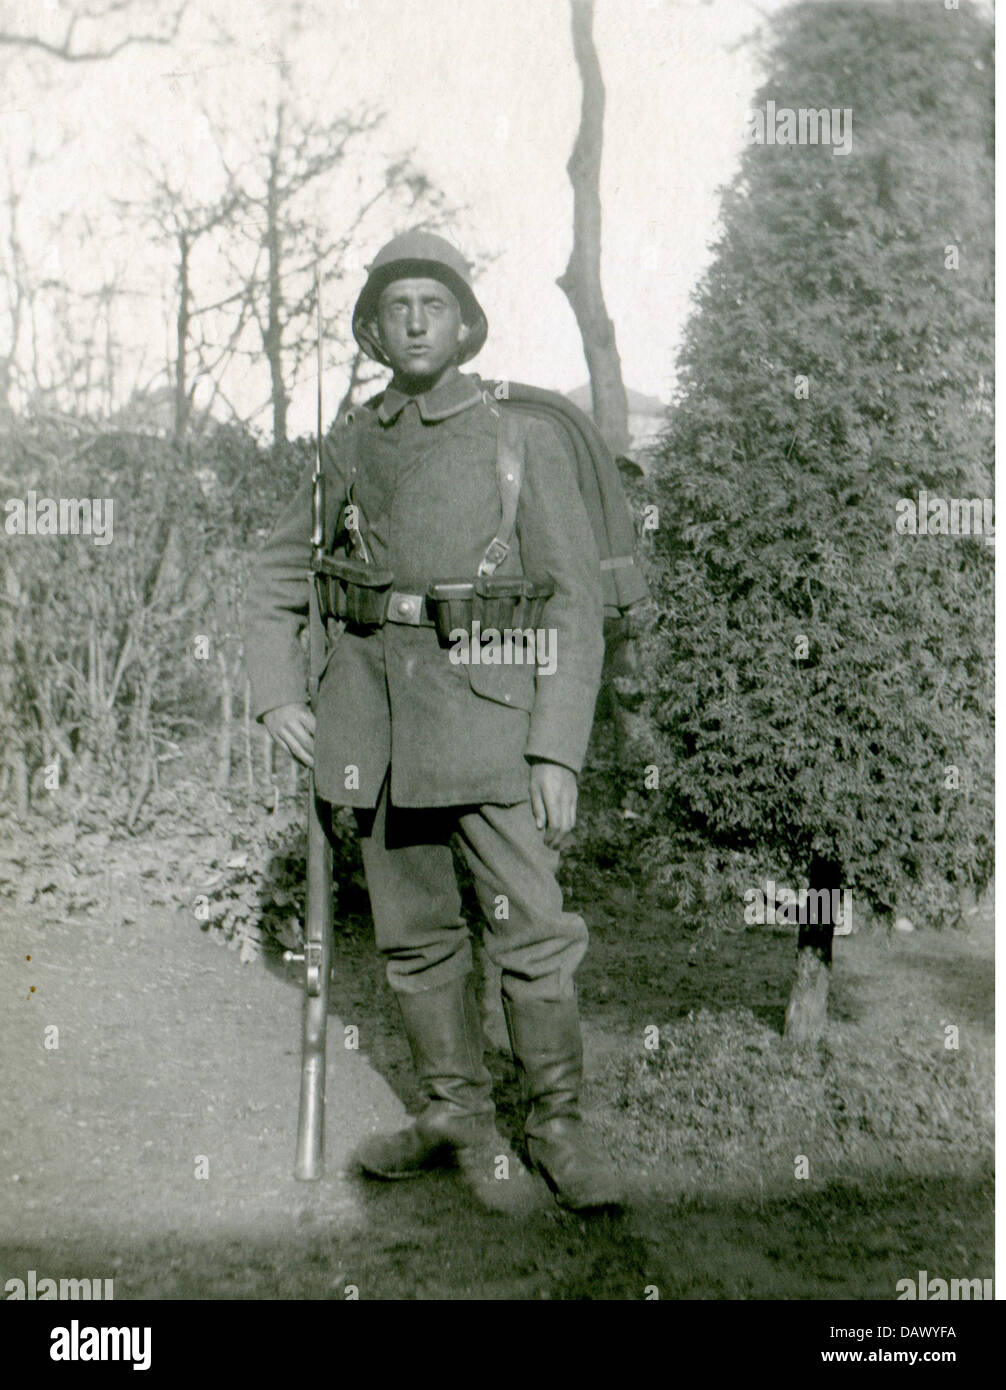 events, First World War / WWI, Western Front, German soldier in full ...